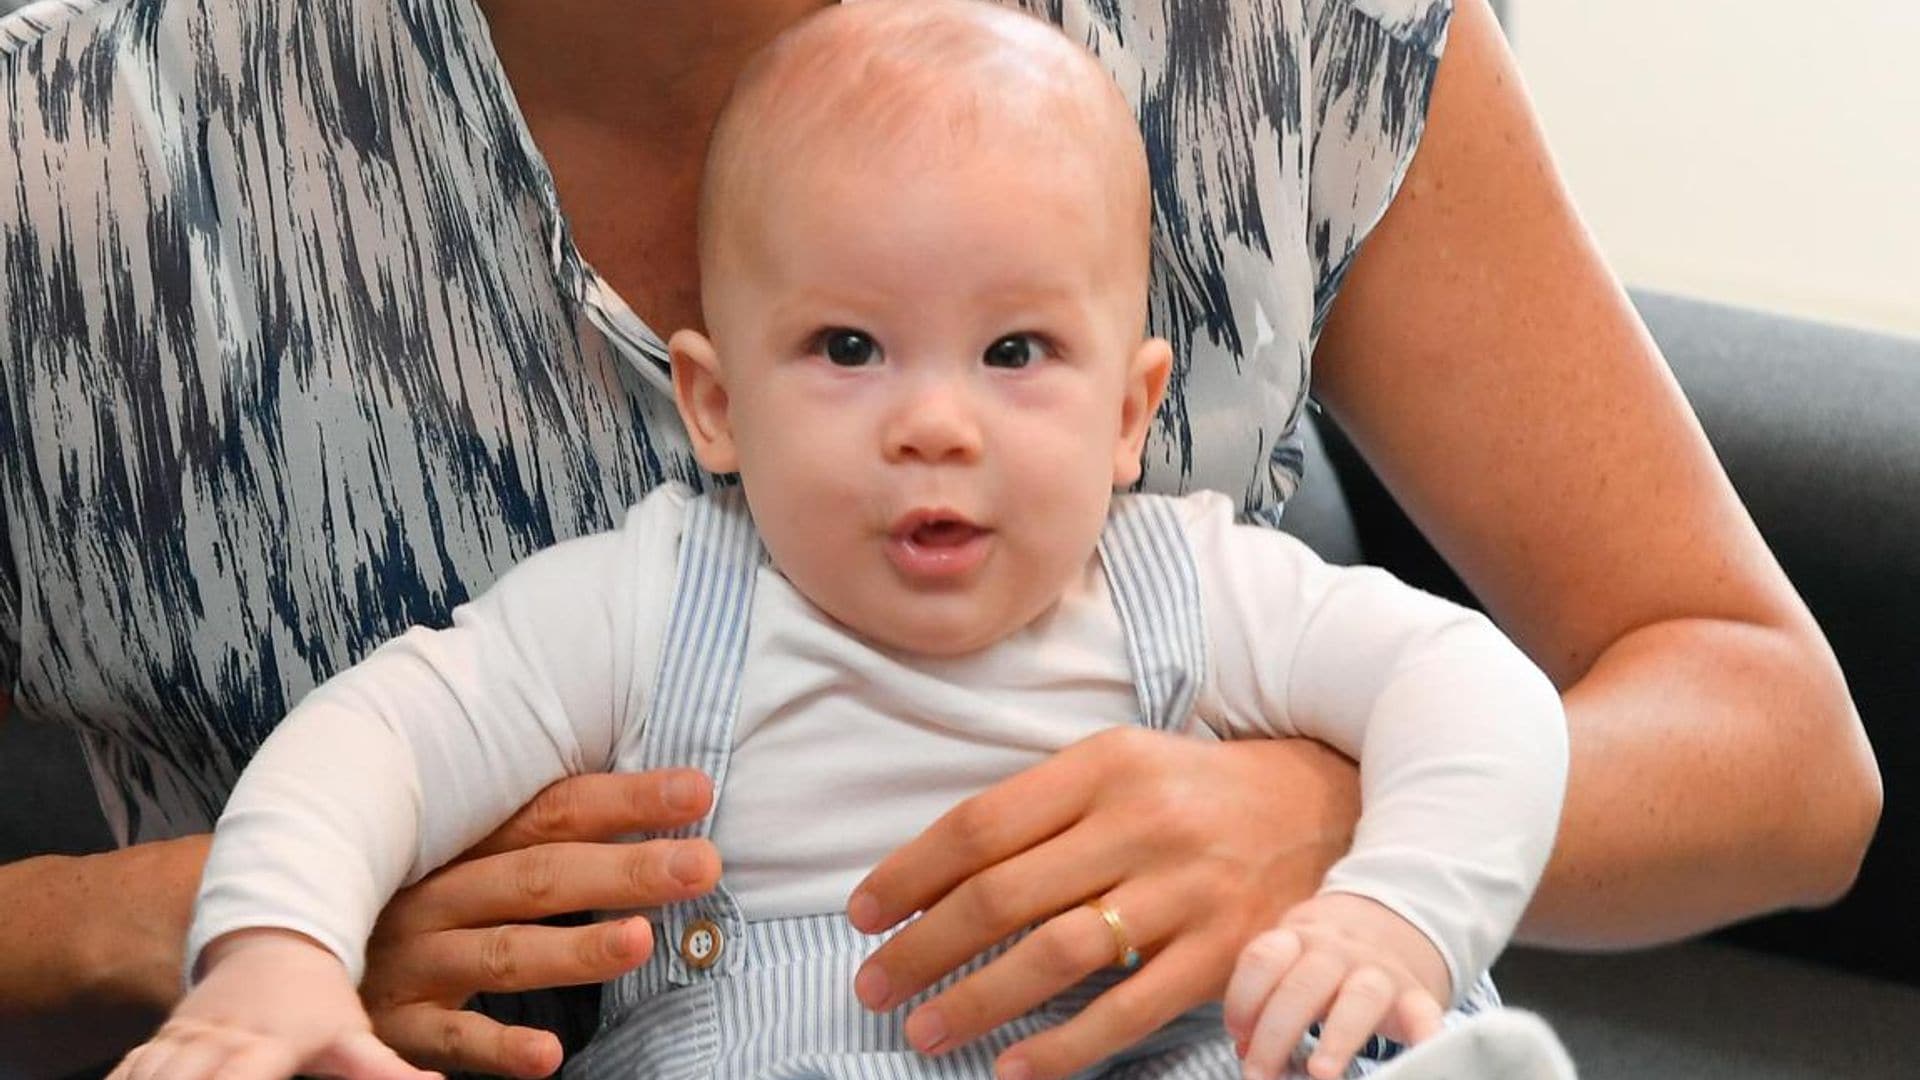 The Duke and Duchess of Sussex's son Archie is six months old